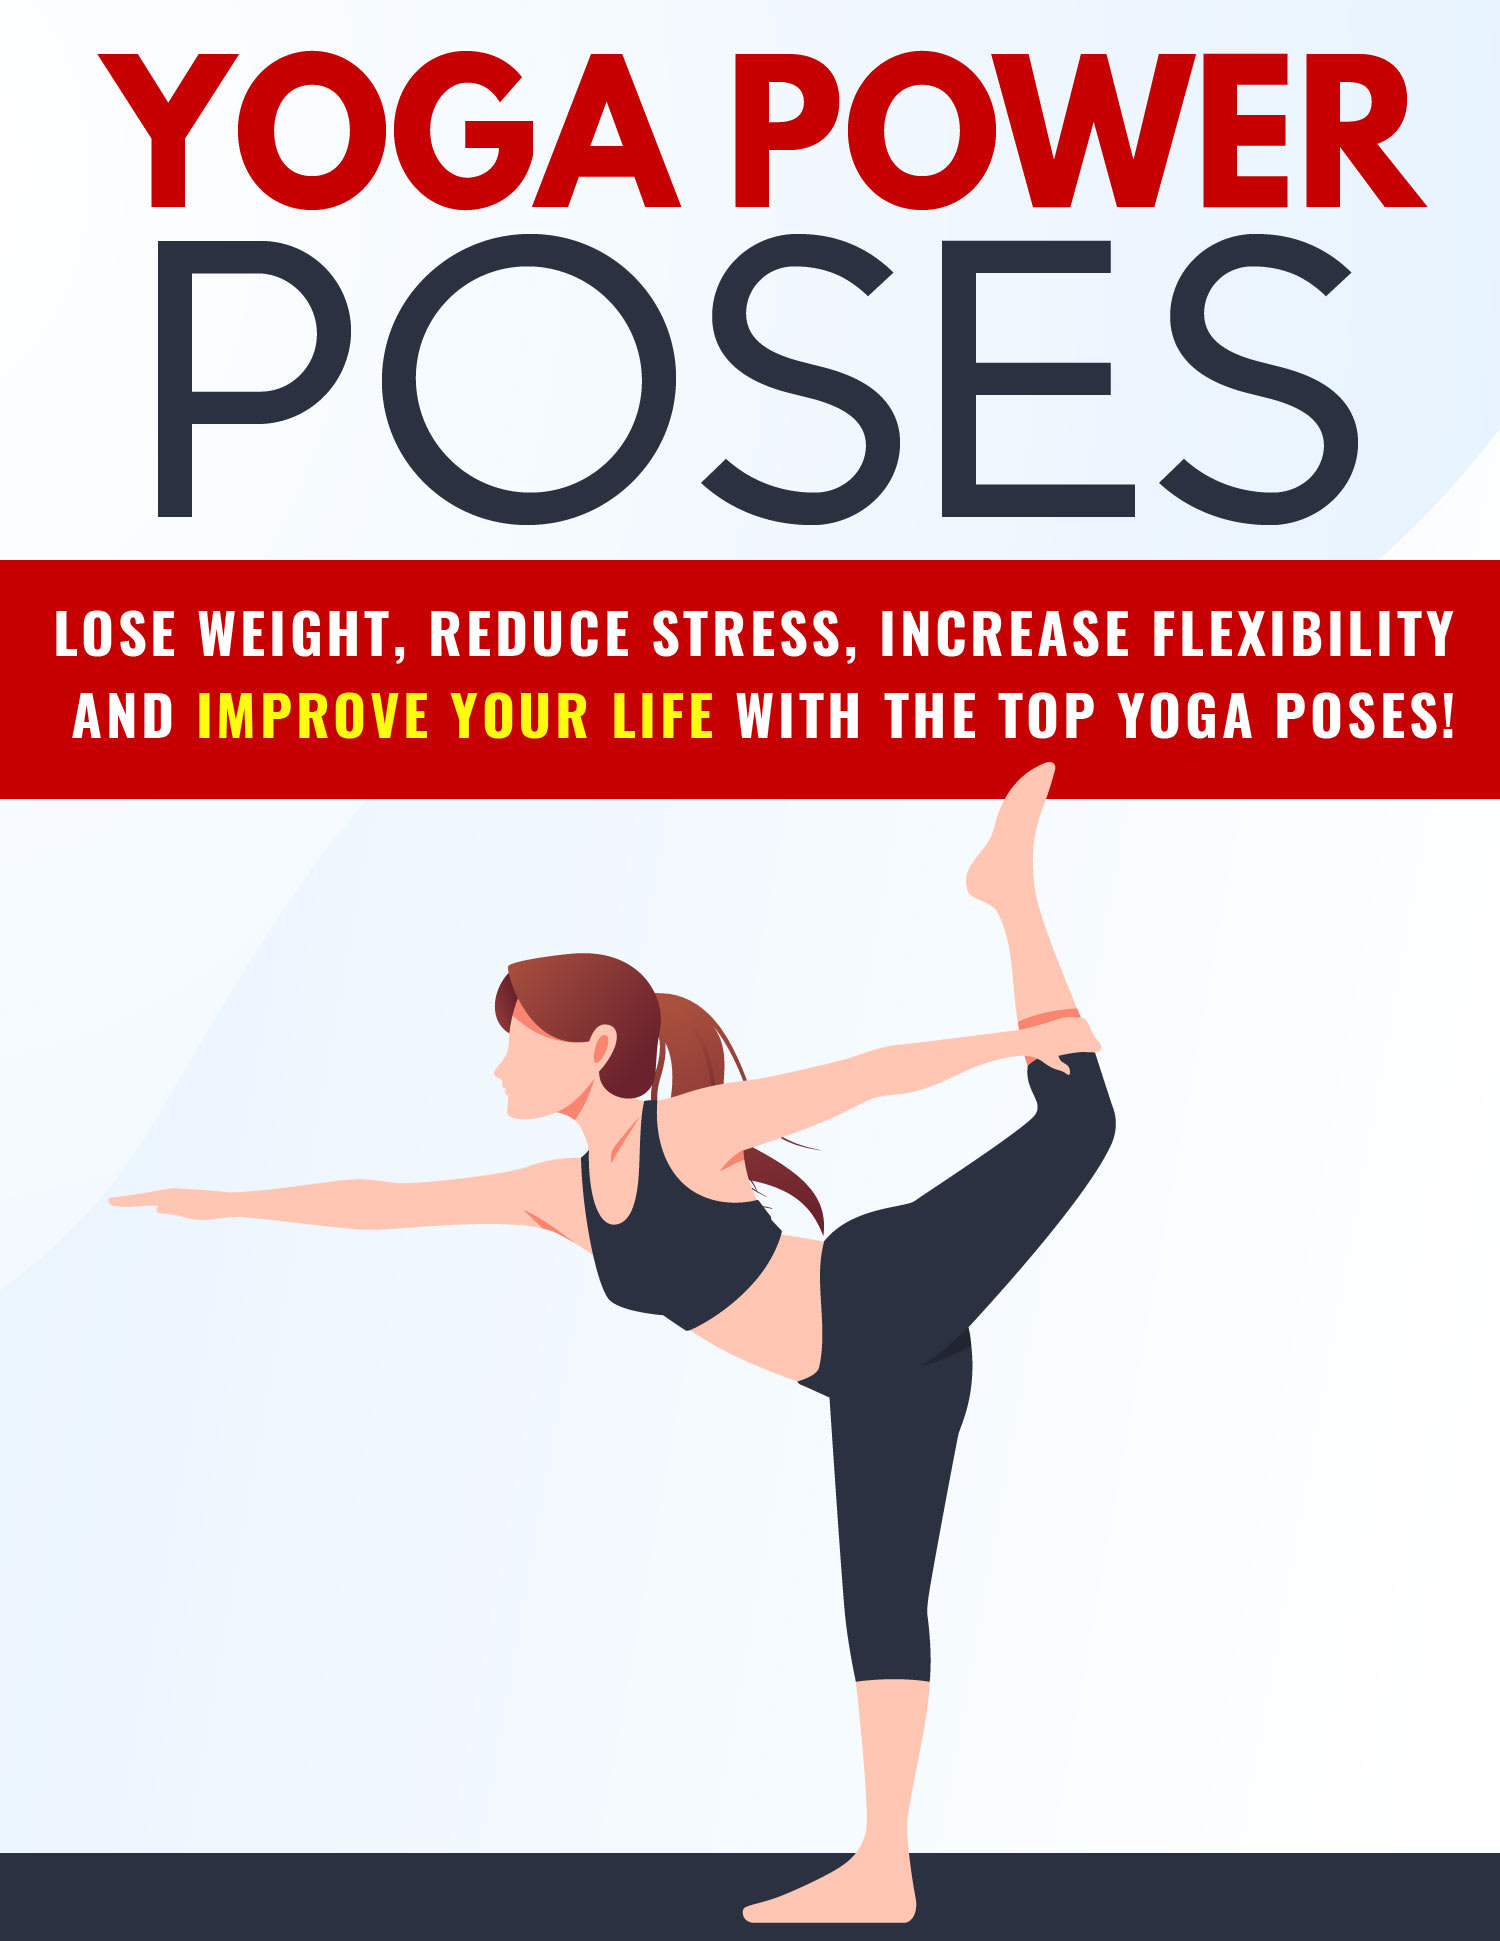 7 Simple Yoga Poses To Lose Weight Easily | Effective Weight loss Yoga |  Power Yoga - yoga poses for effective weight loss - Vikatan